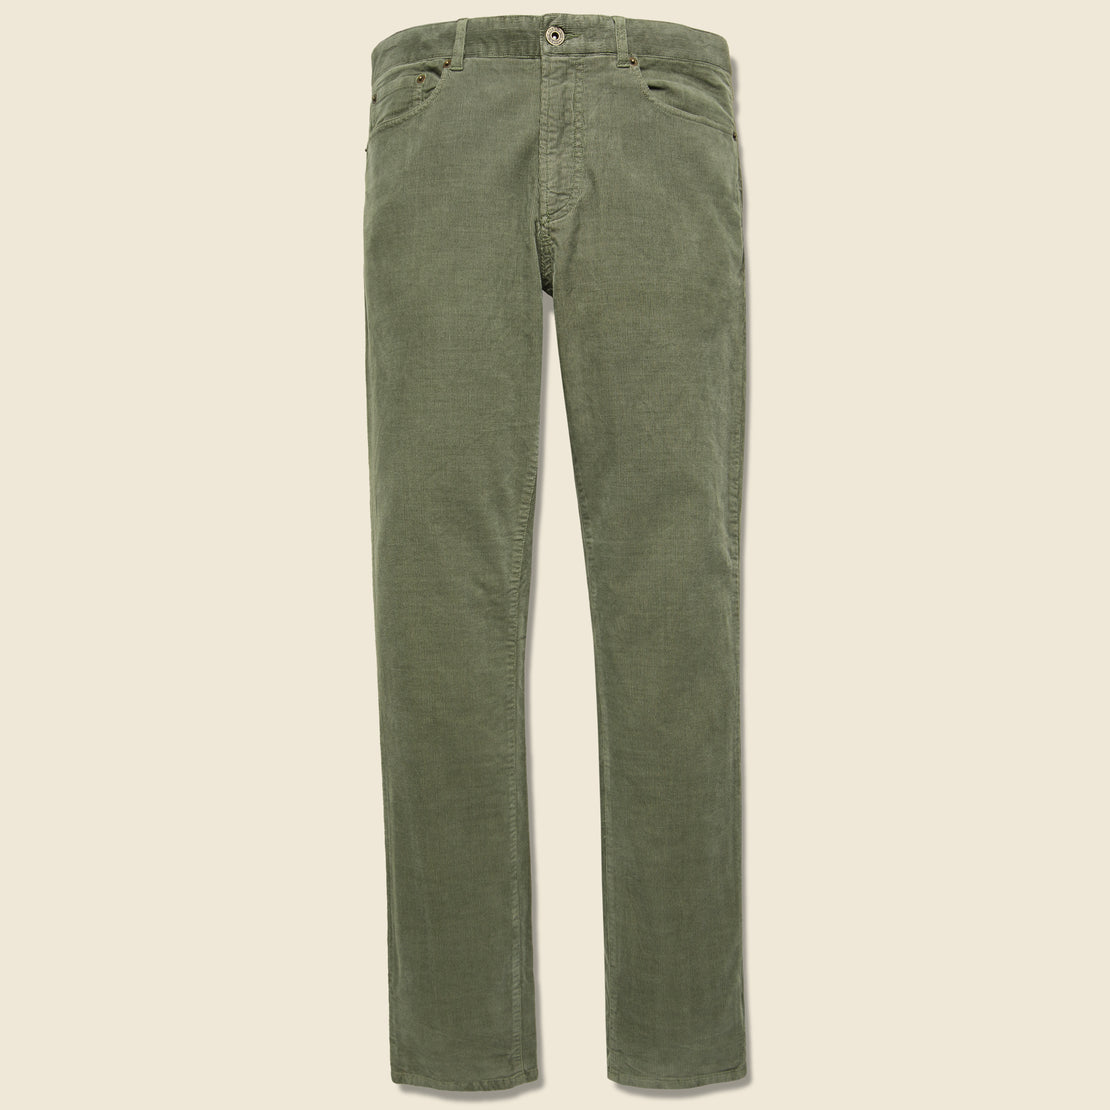 Faherty Stretch Corduroy Pant - Washed Olive